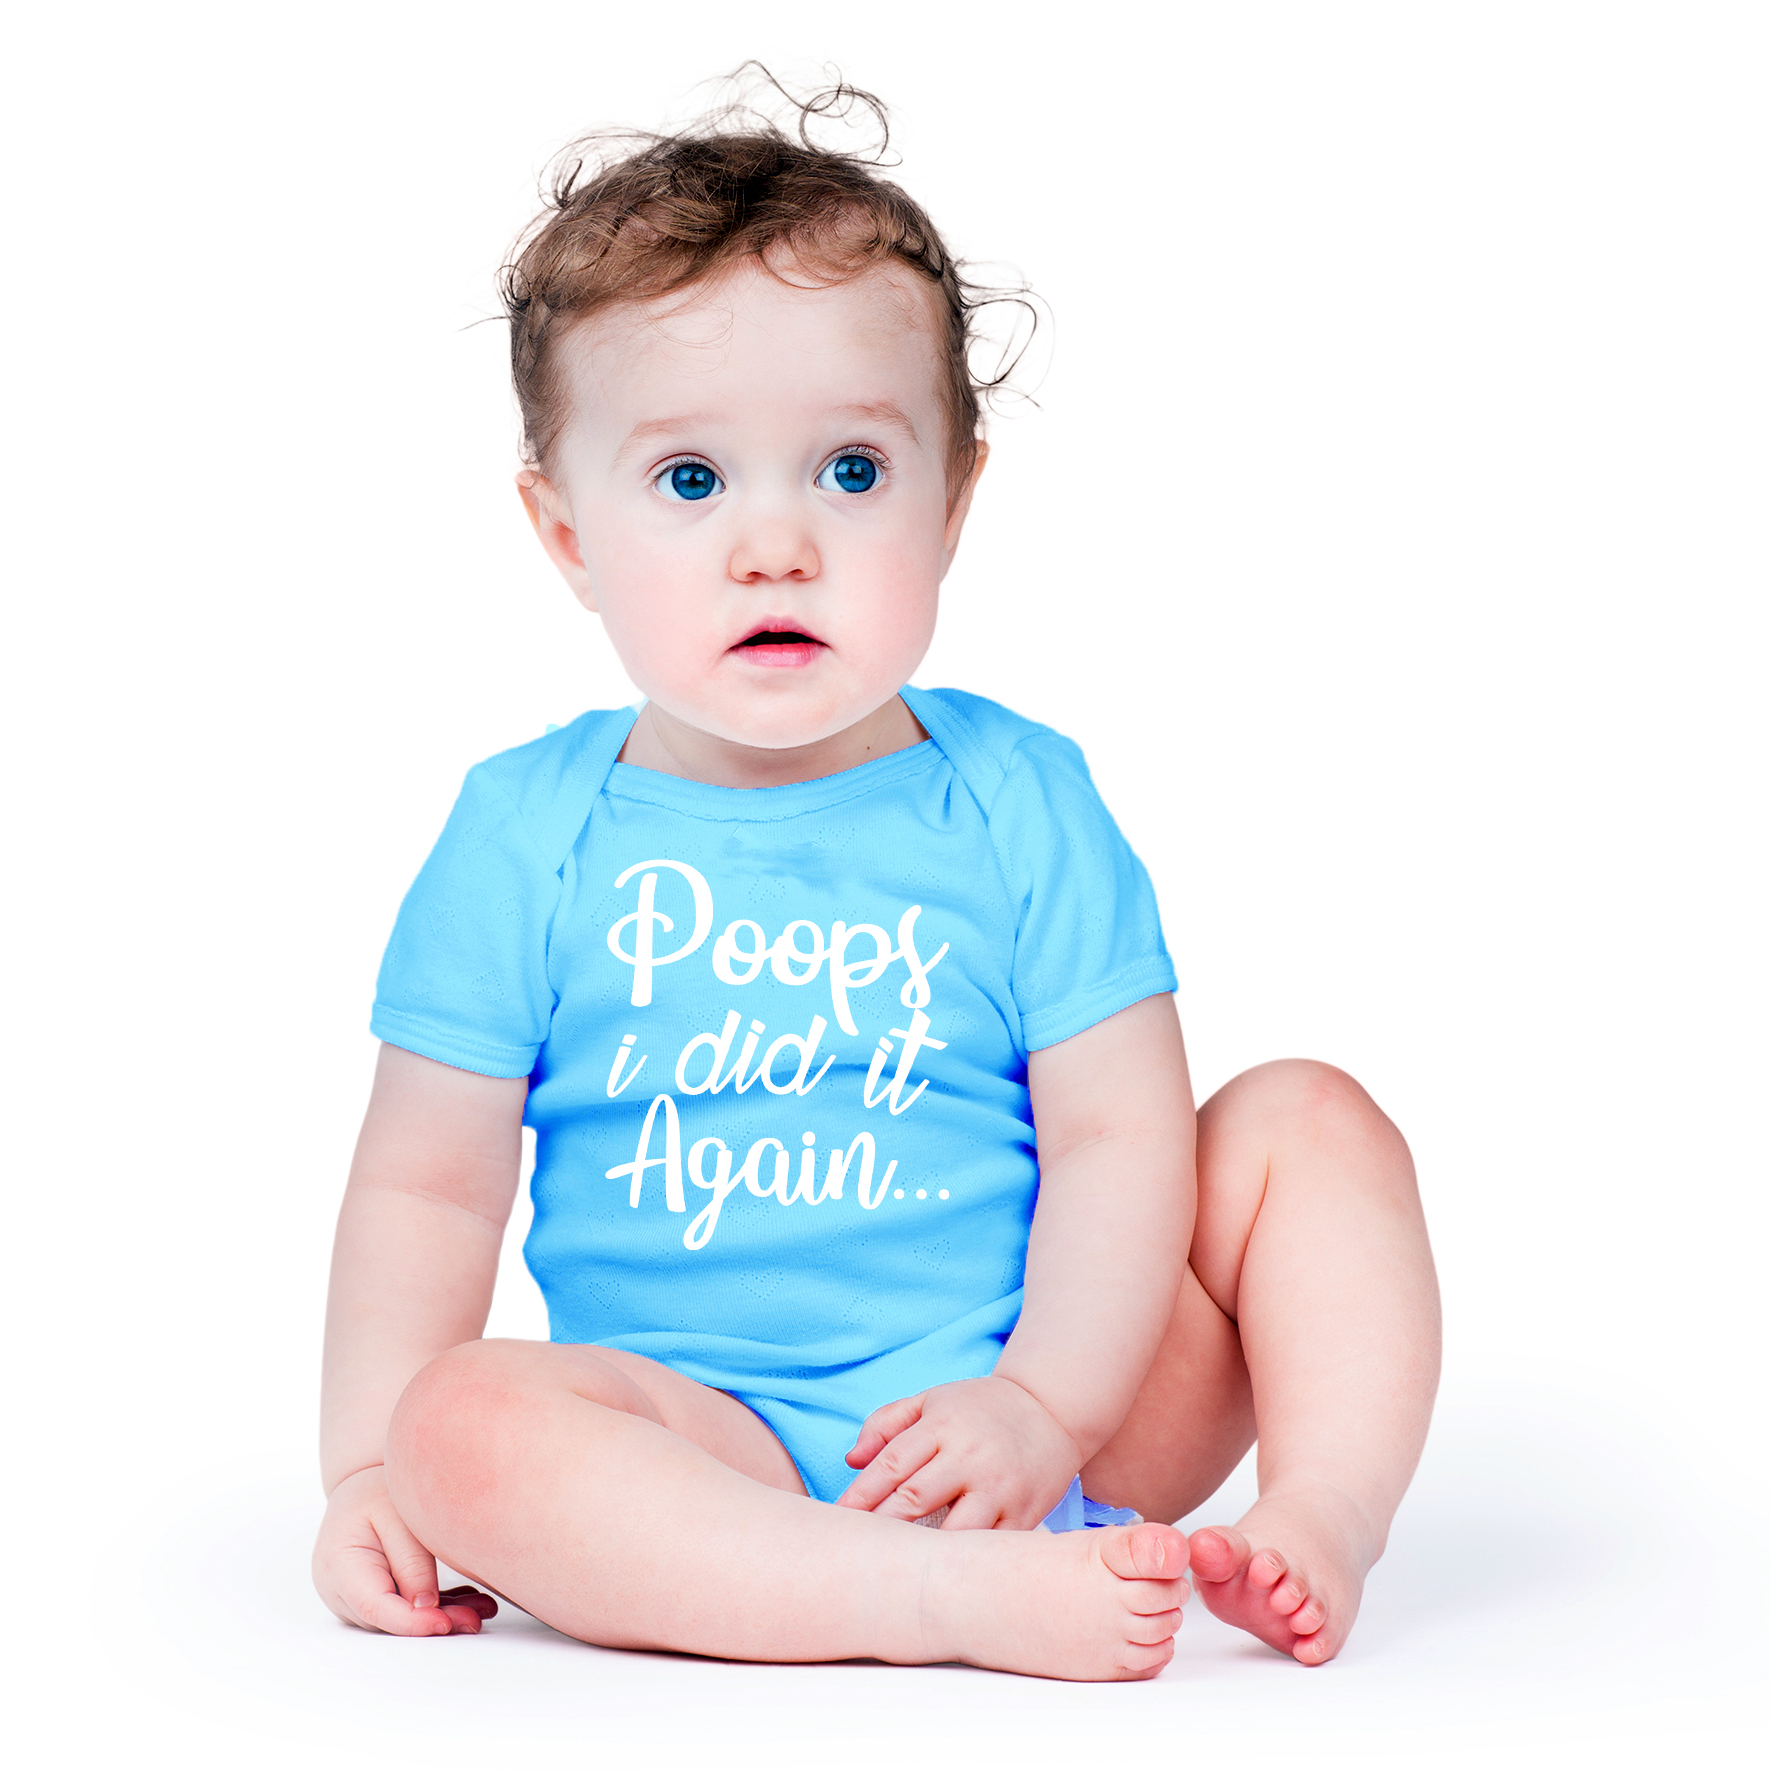 Poops, I Did It Again - Funny Parody Song, Oh Baby, Baby - Cute One-Piece Infant Baby Bodysuit - image 2 of 4